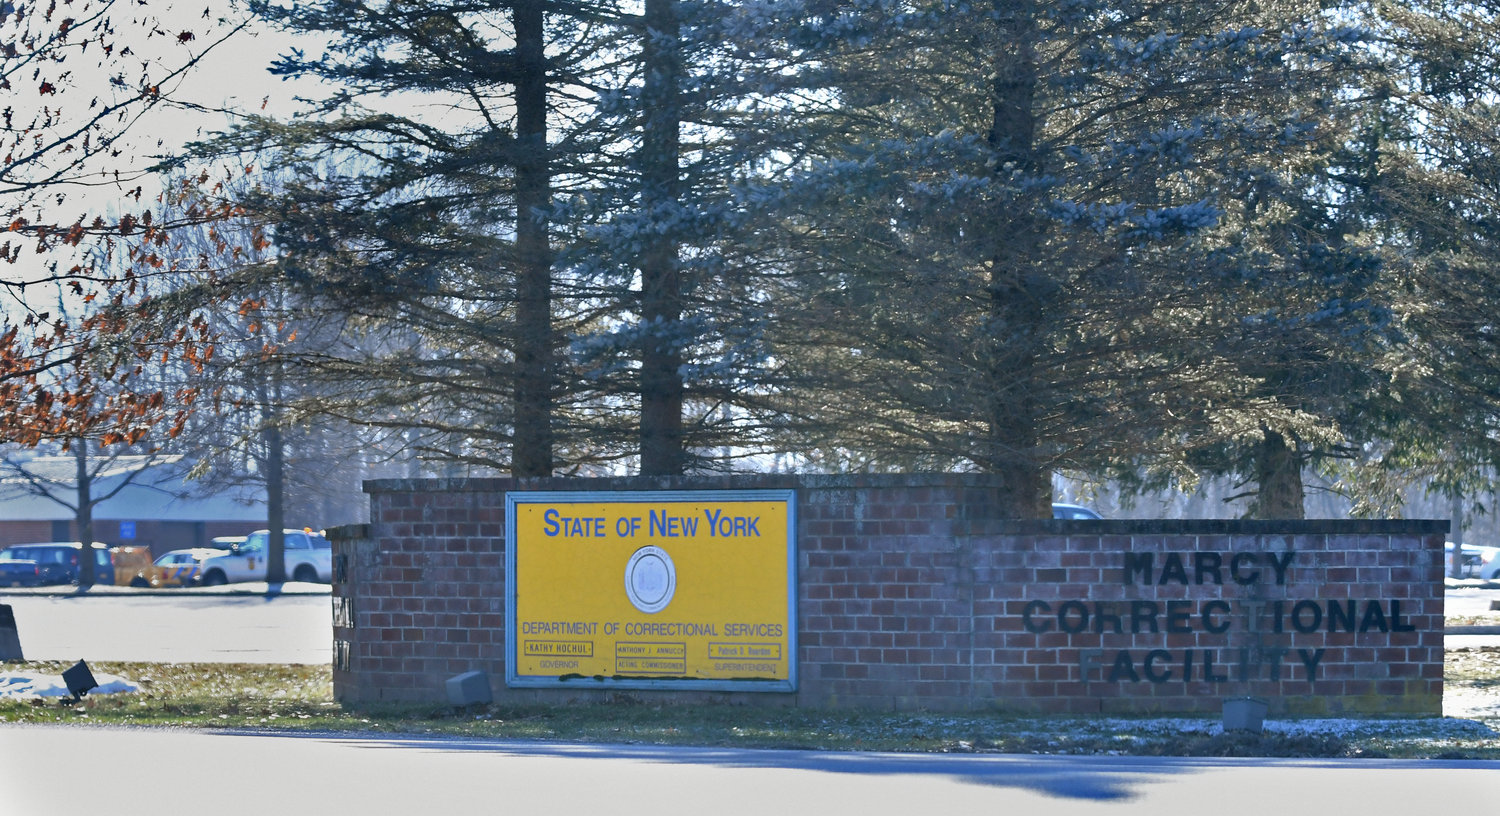 The front entrance of the Marcy Correctional Facility off River Road in the Town of Marcy.